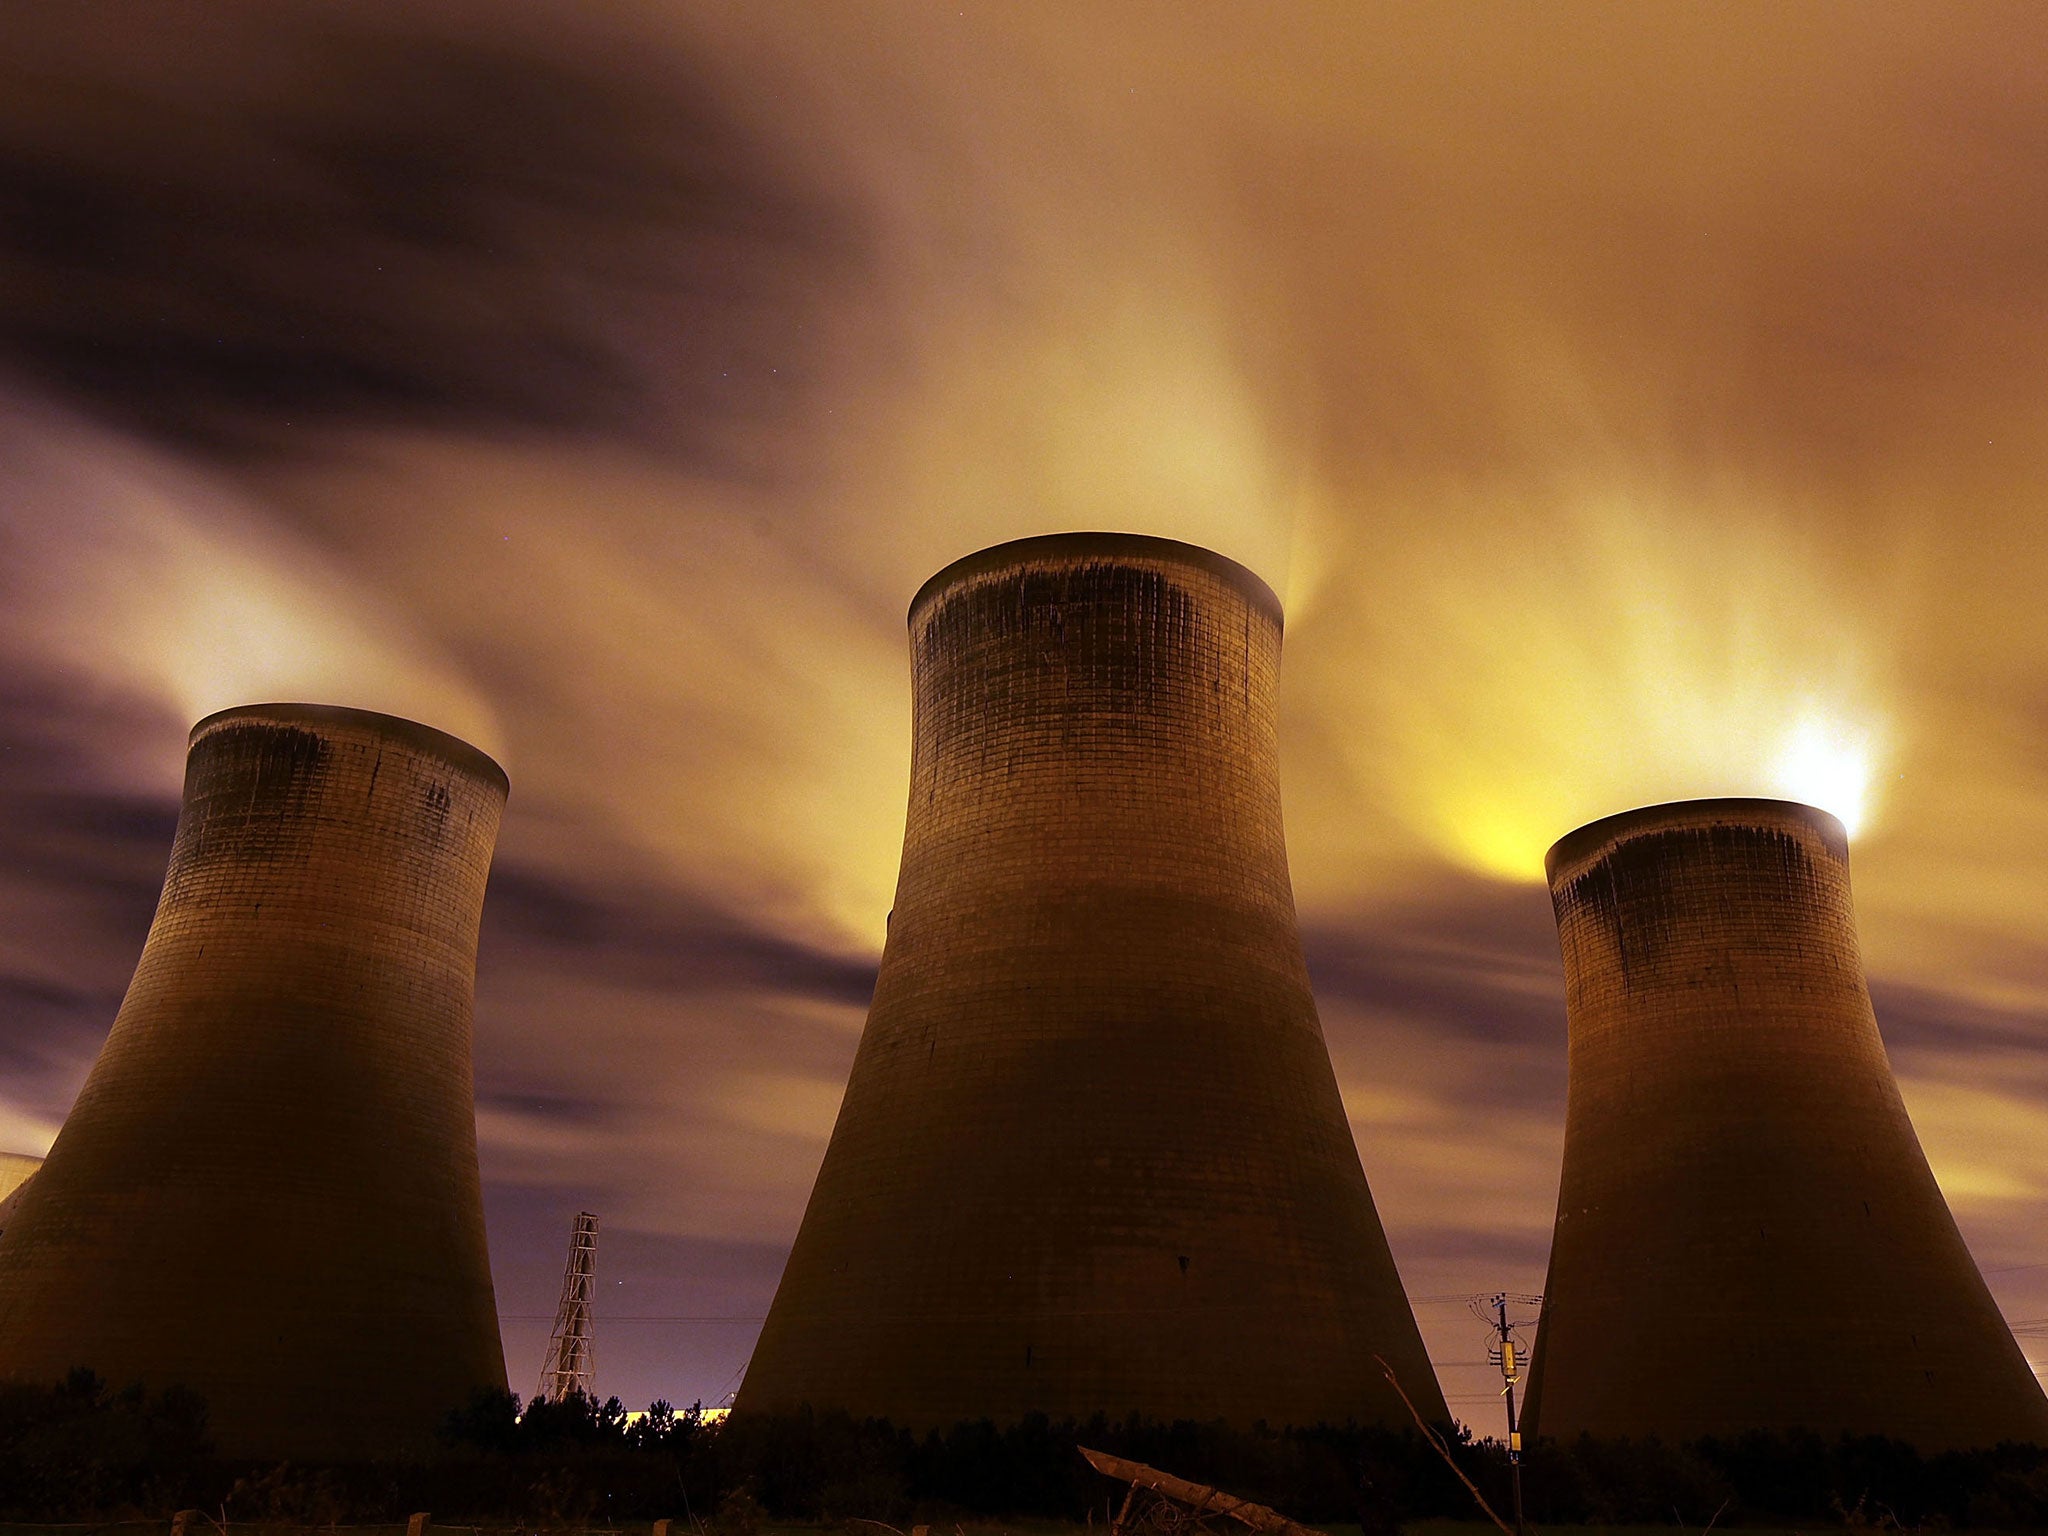 The coal fueled Fiddlers Ferry power station emits vapour into the night sky on November 16, 2009 in Warrington, United Kingdom.